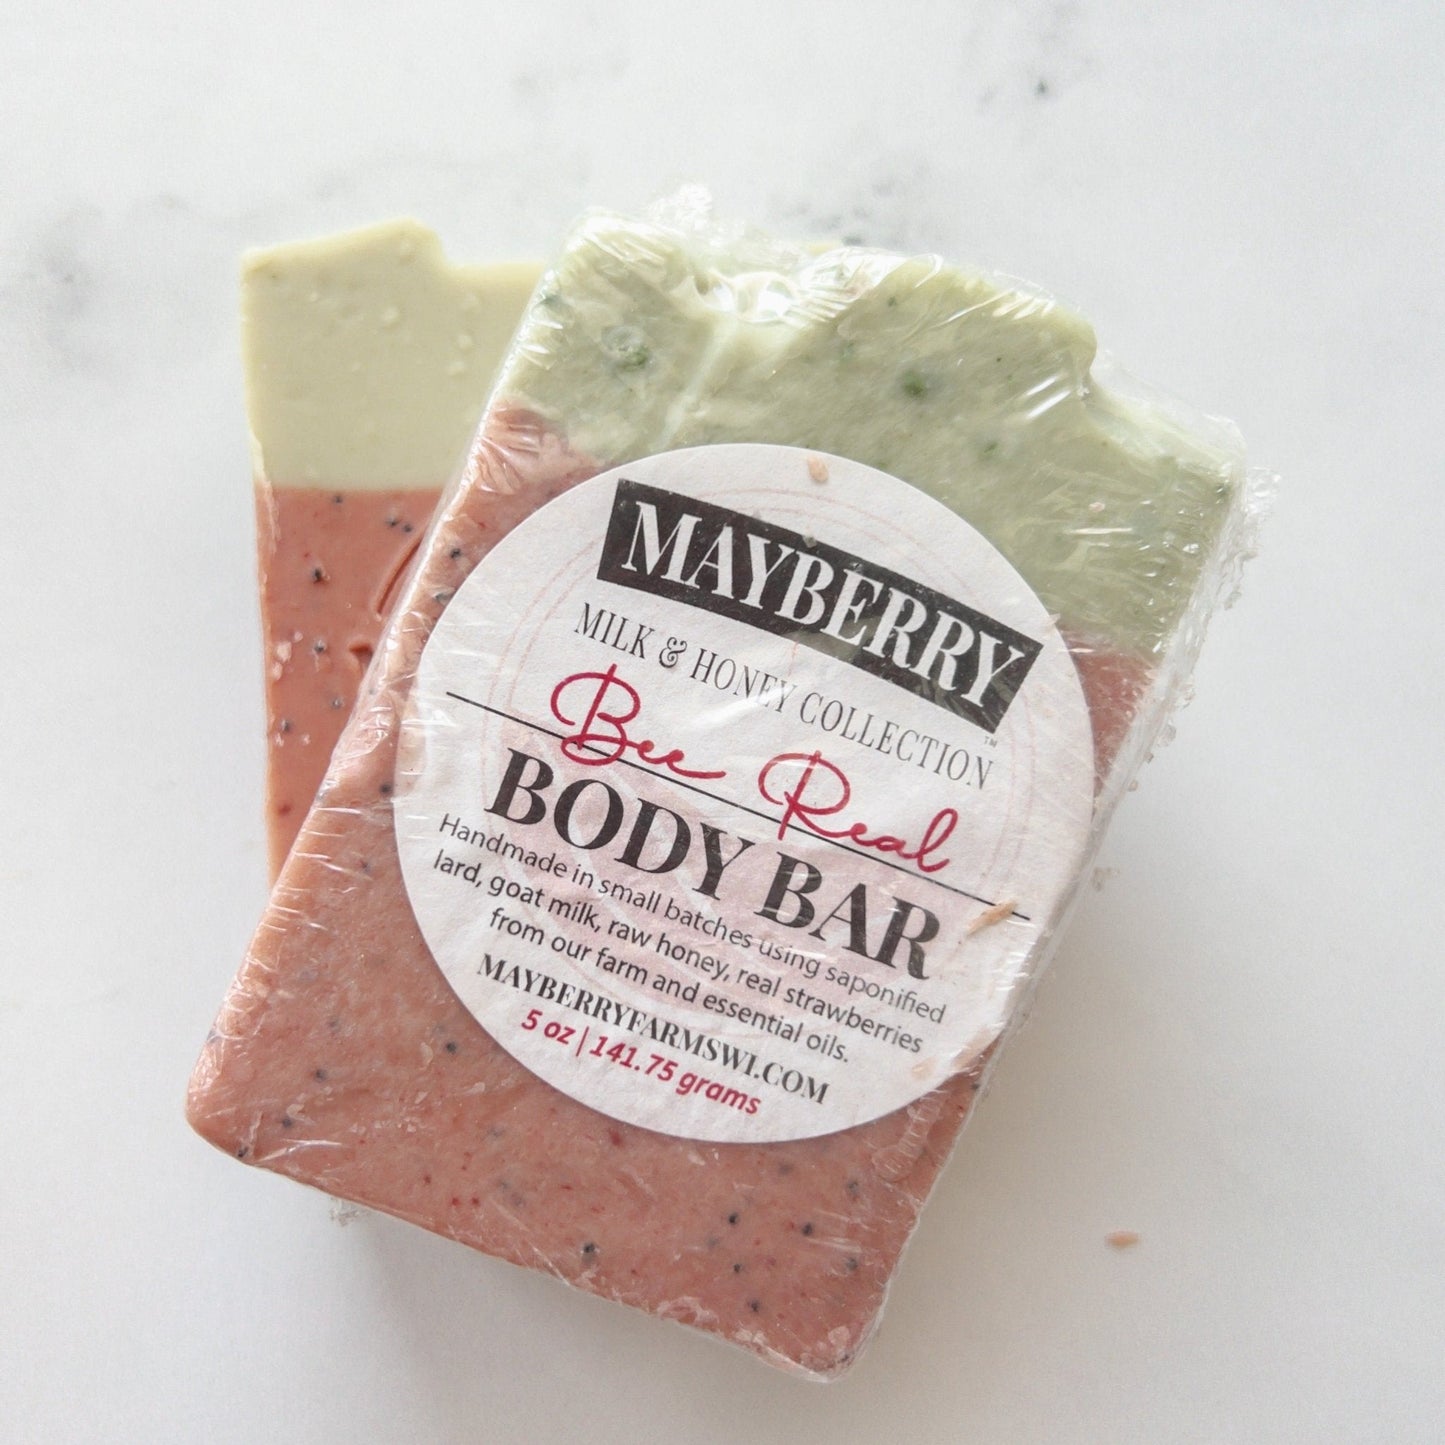 Bee Real Strawberry Lime and Patchouli Body Bar Soap - Mayberry Farms